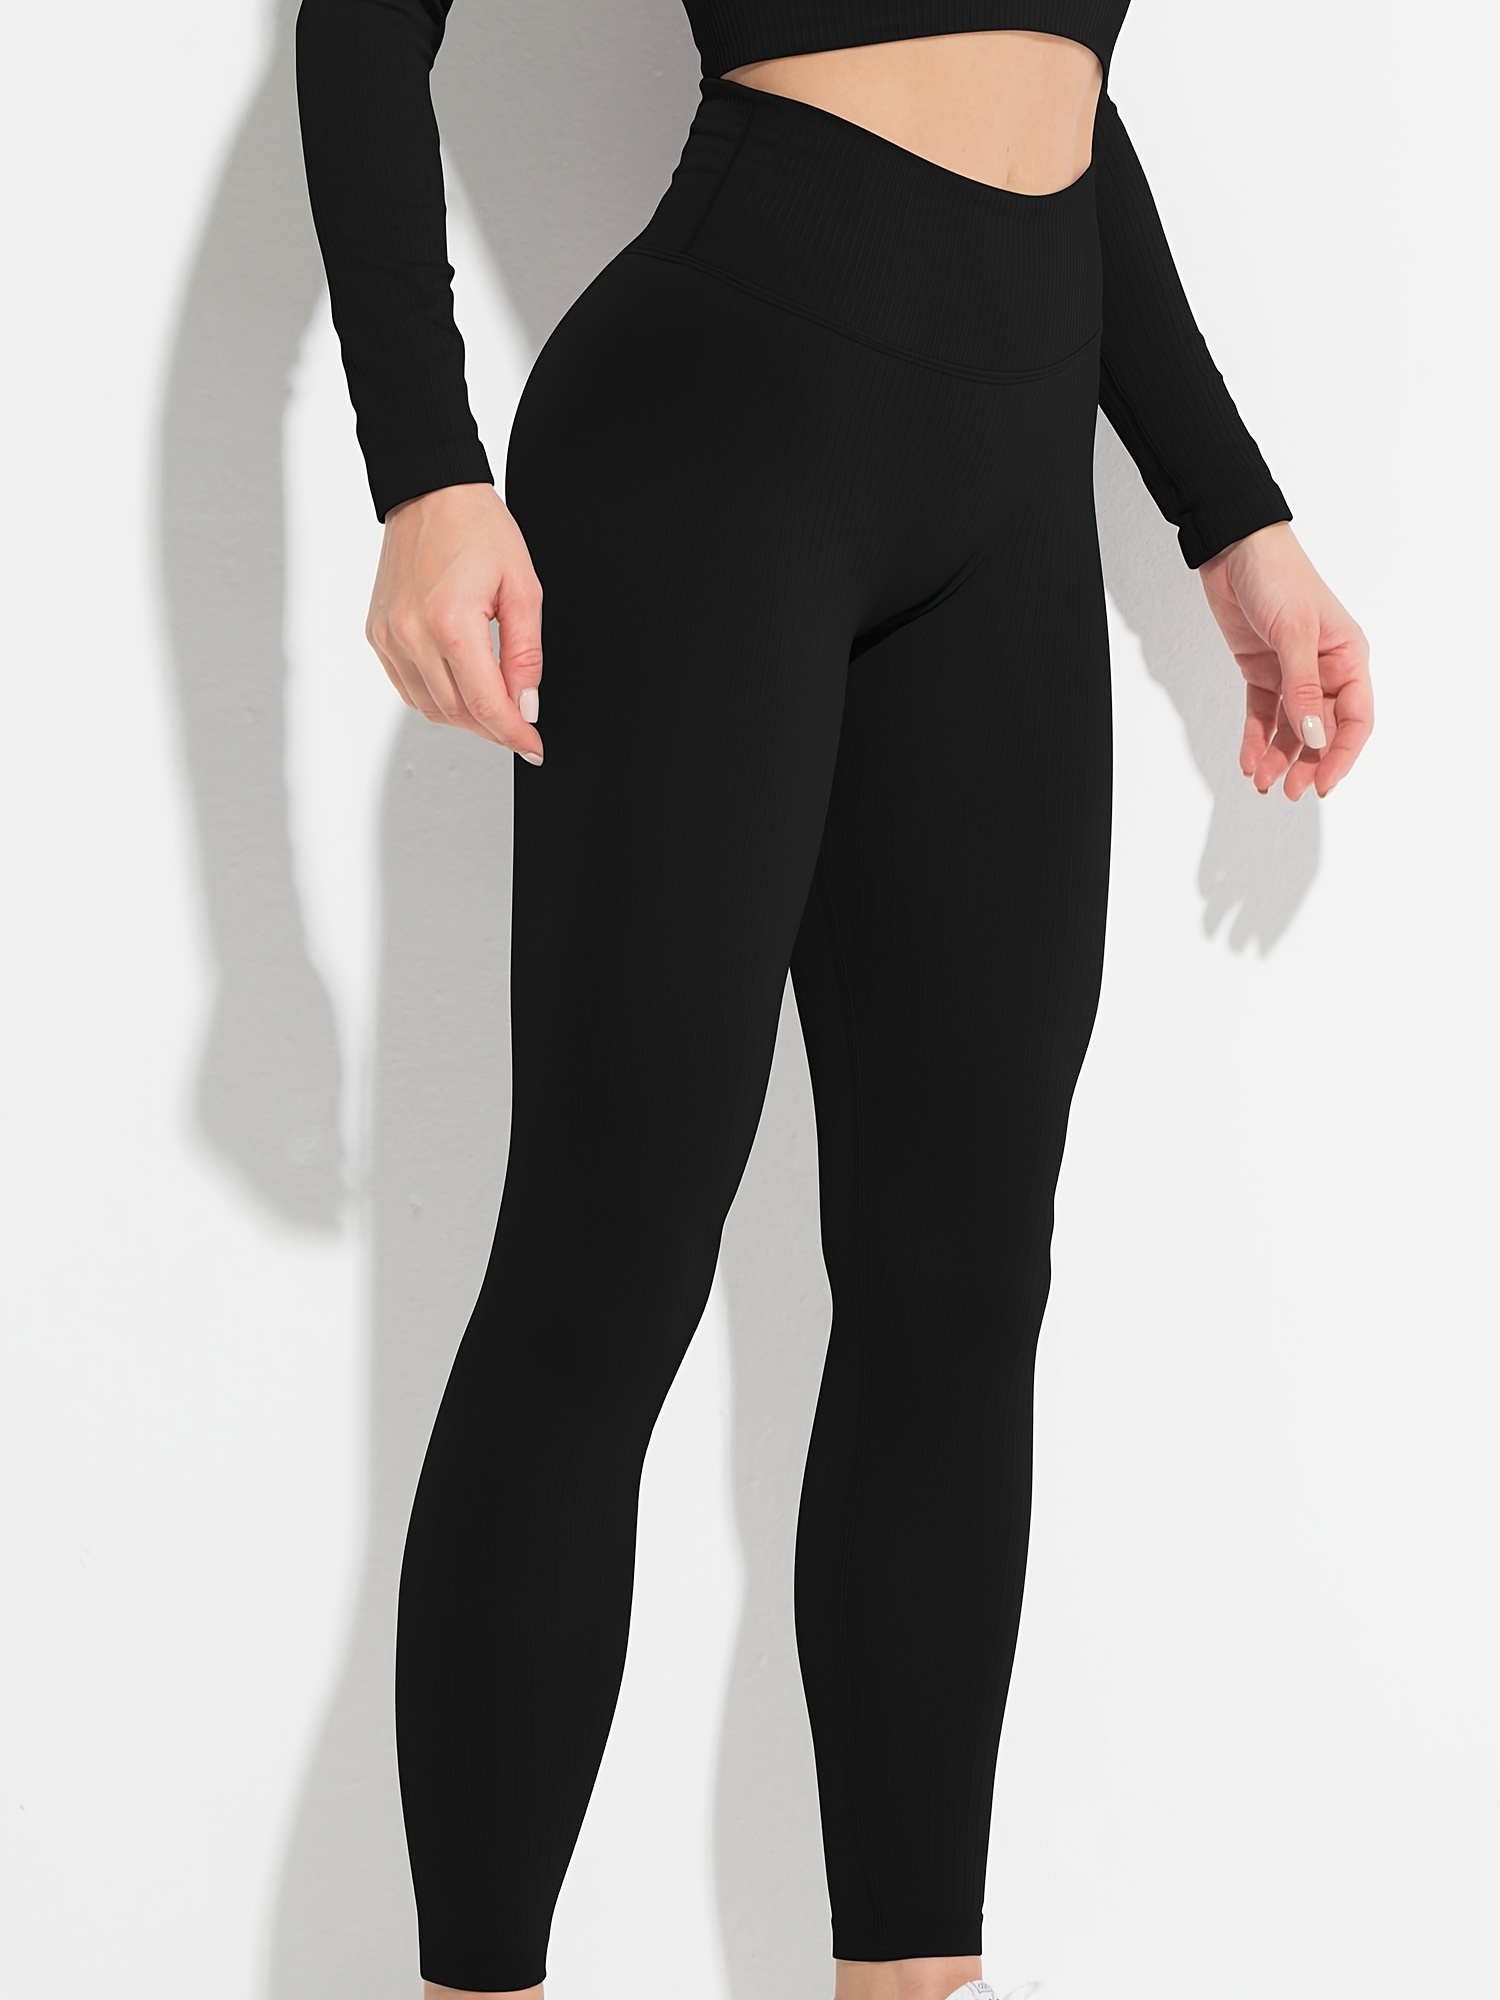 High Waisted Cotton Yoga Seamless Workout Leggings For Women